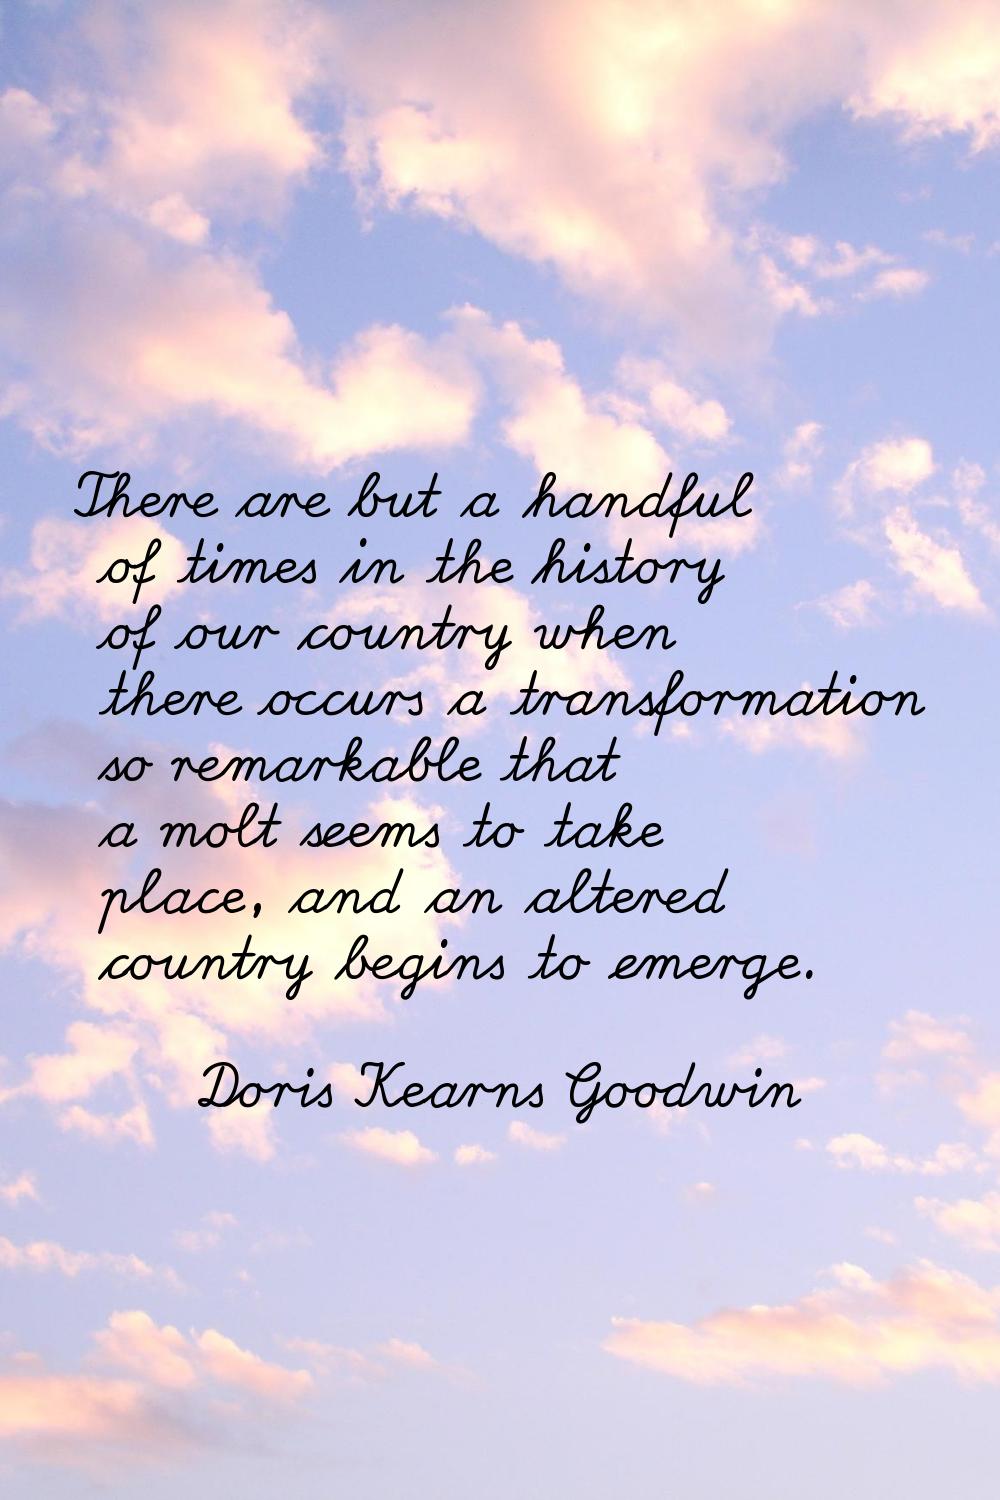 There are but a handful of times in the history of our country when there occurs a transformation s